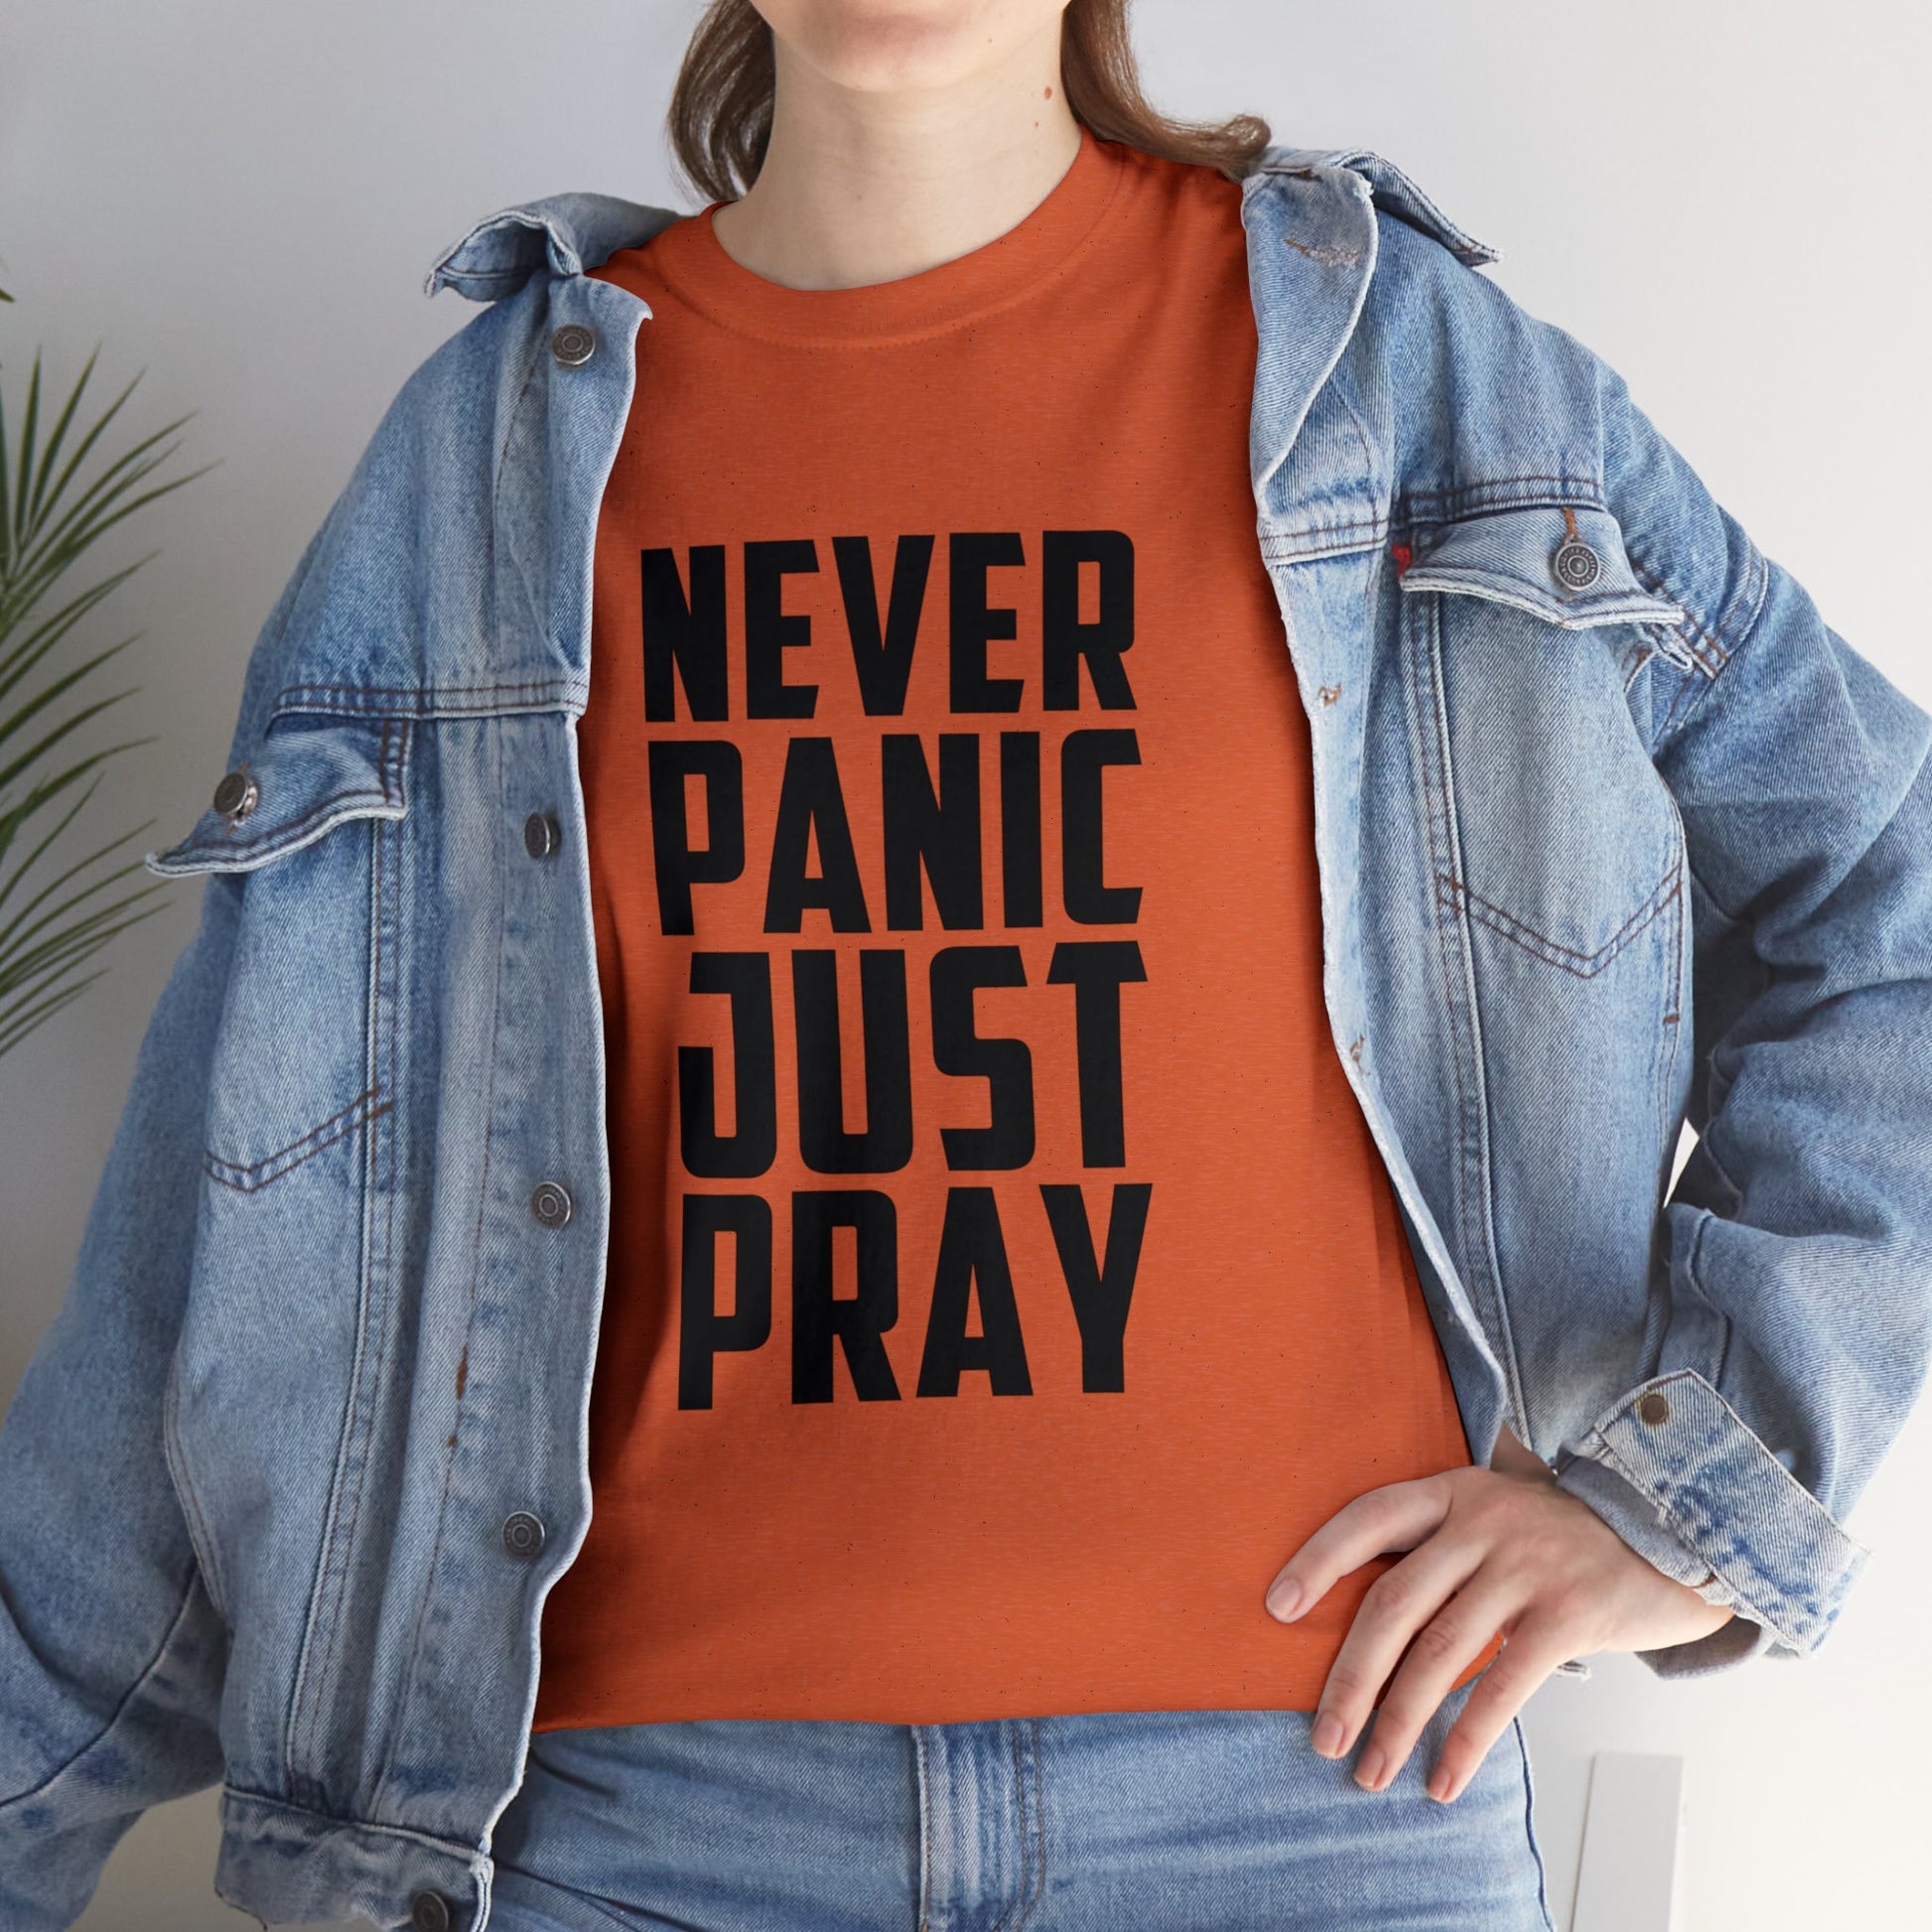 "Never Panic, Just Pray" T-Shirt - Weave Got Gifts - Unique Gifts You Won’t Find Anywhere Else!